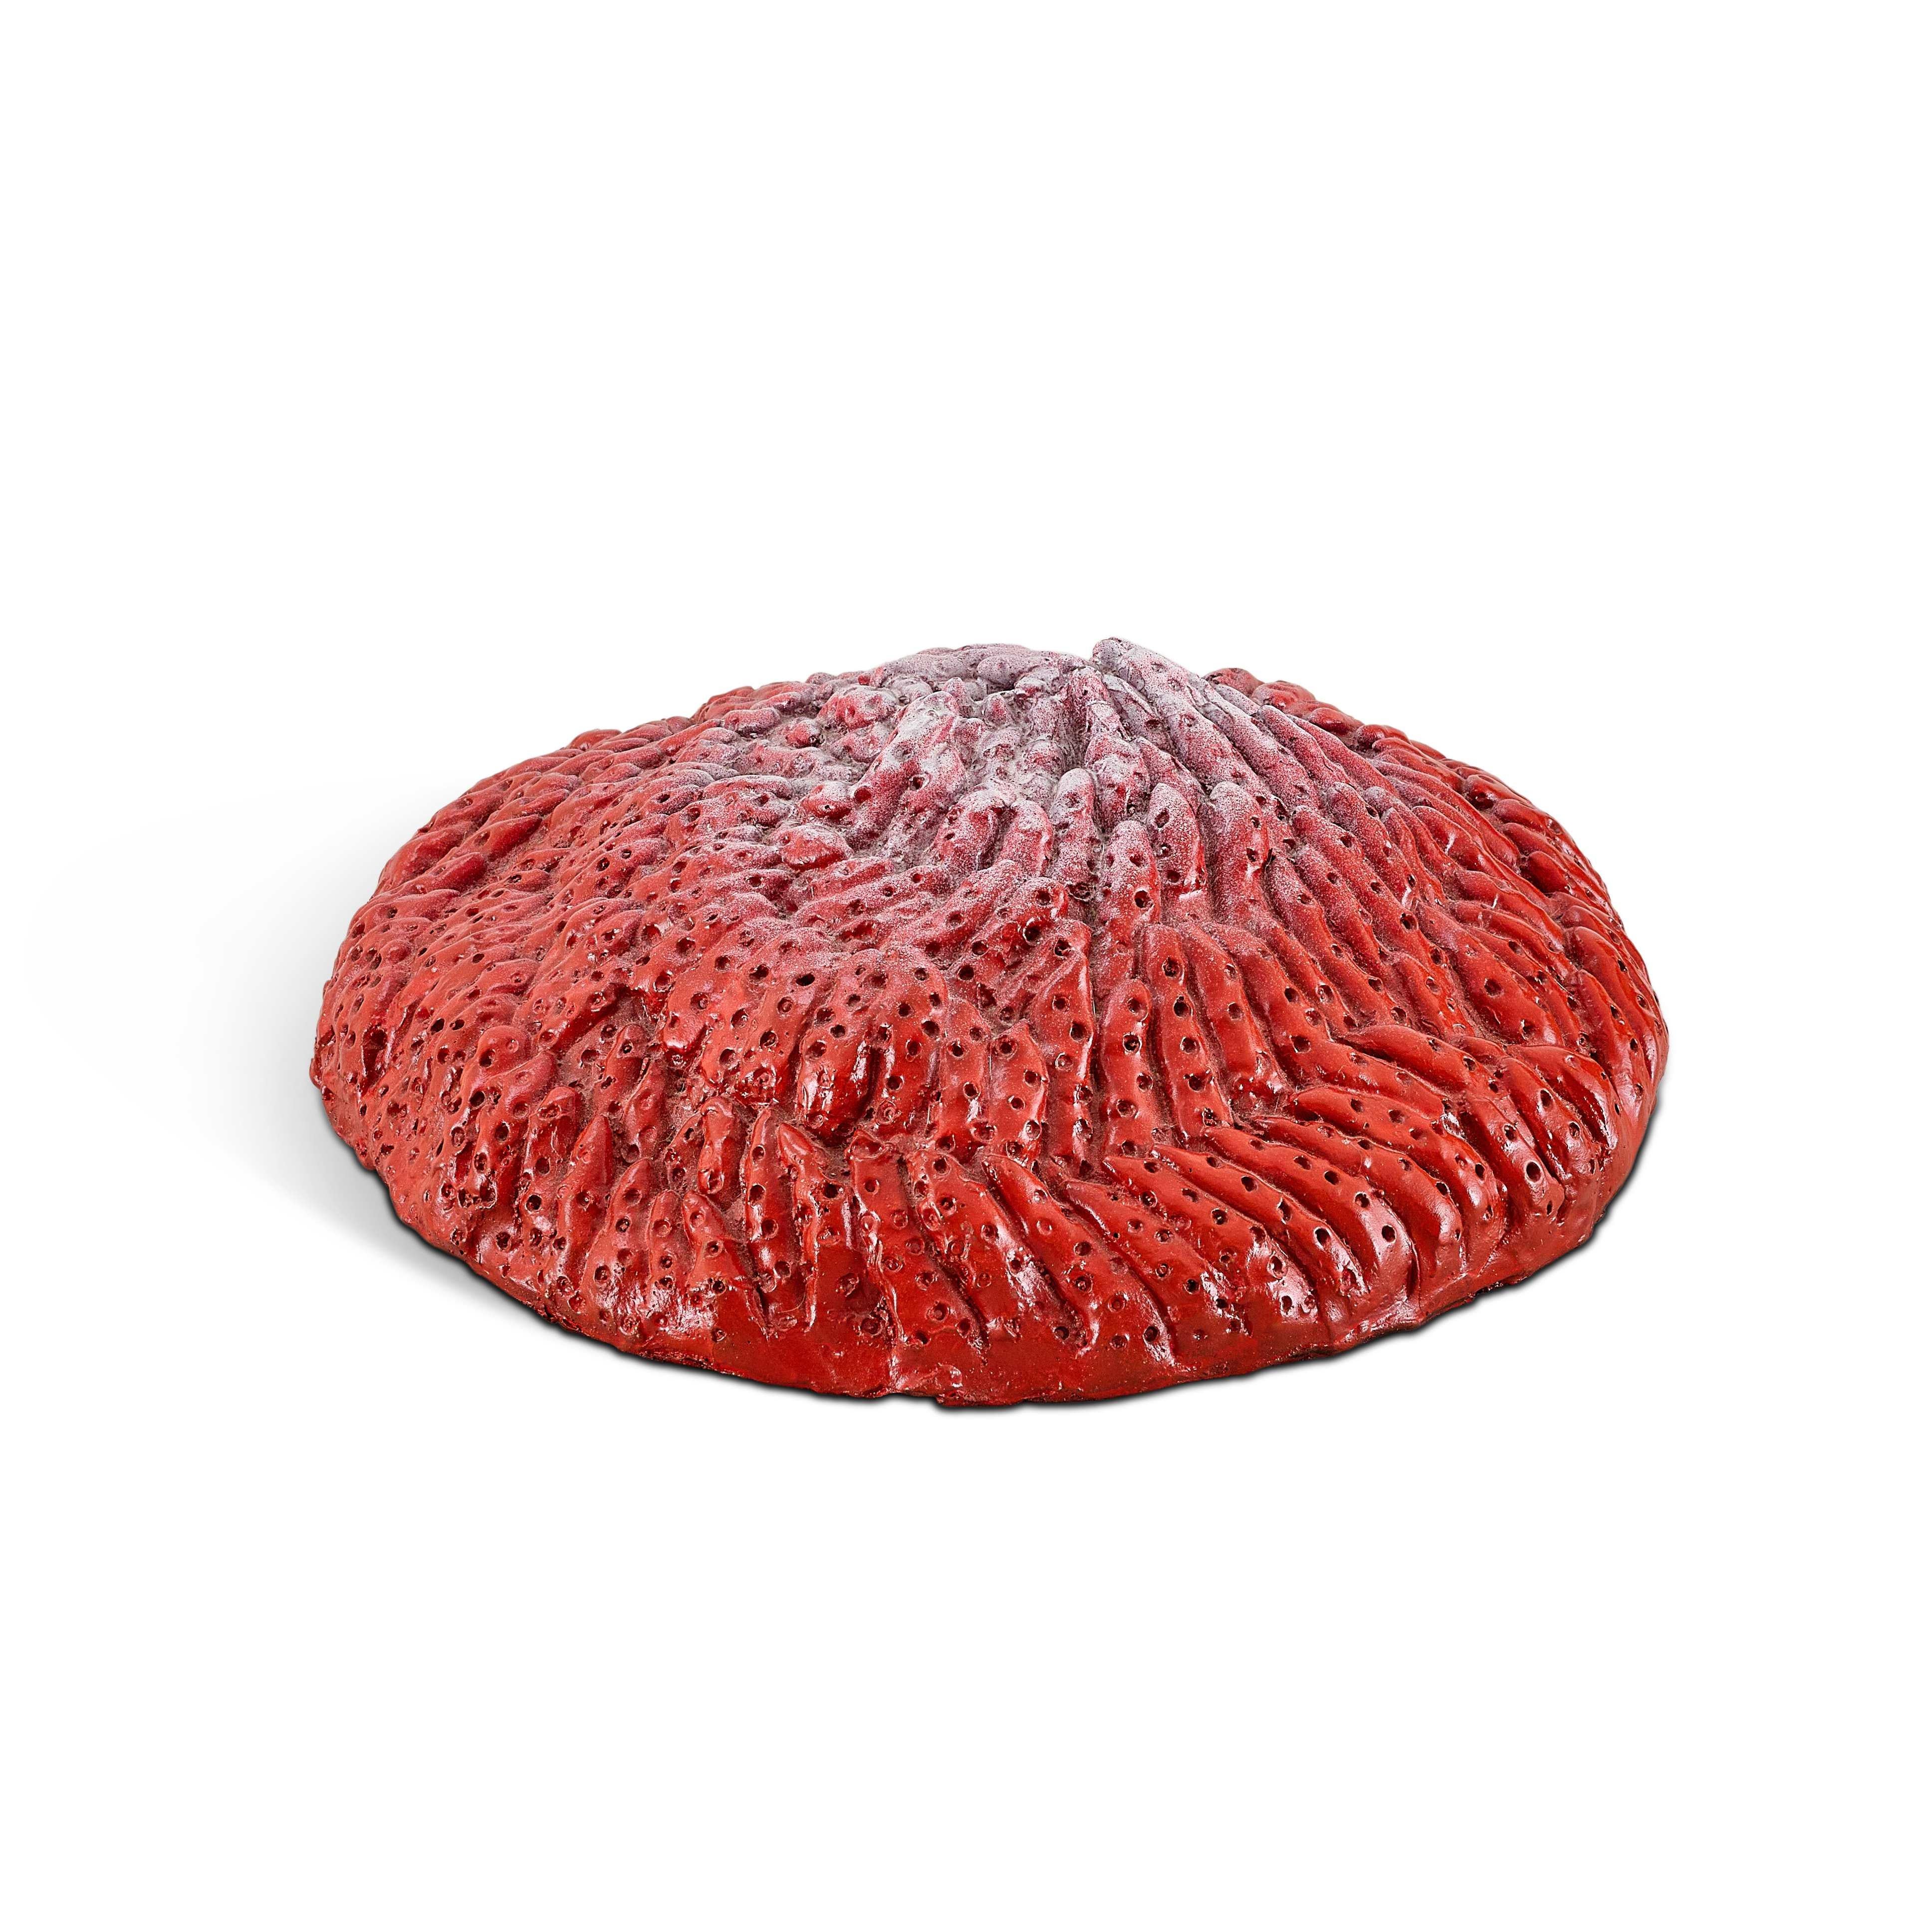 Strawberry 1. Bronze Sculpture by Yayoi Kusama (1974/93) Limited Edition of 30 For Sale 1